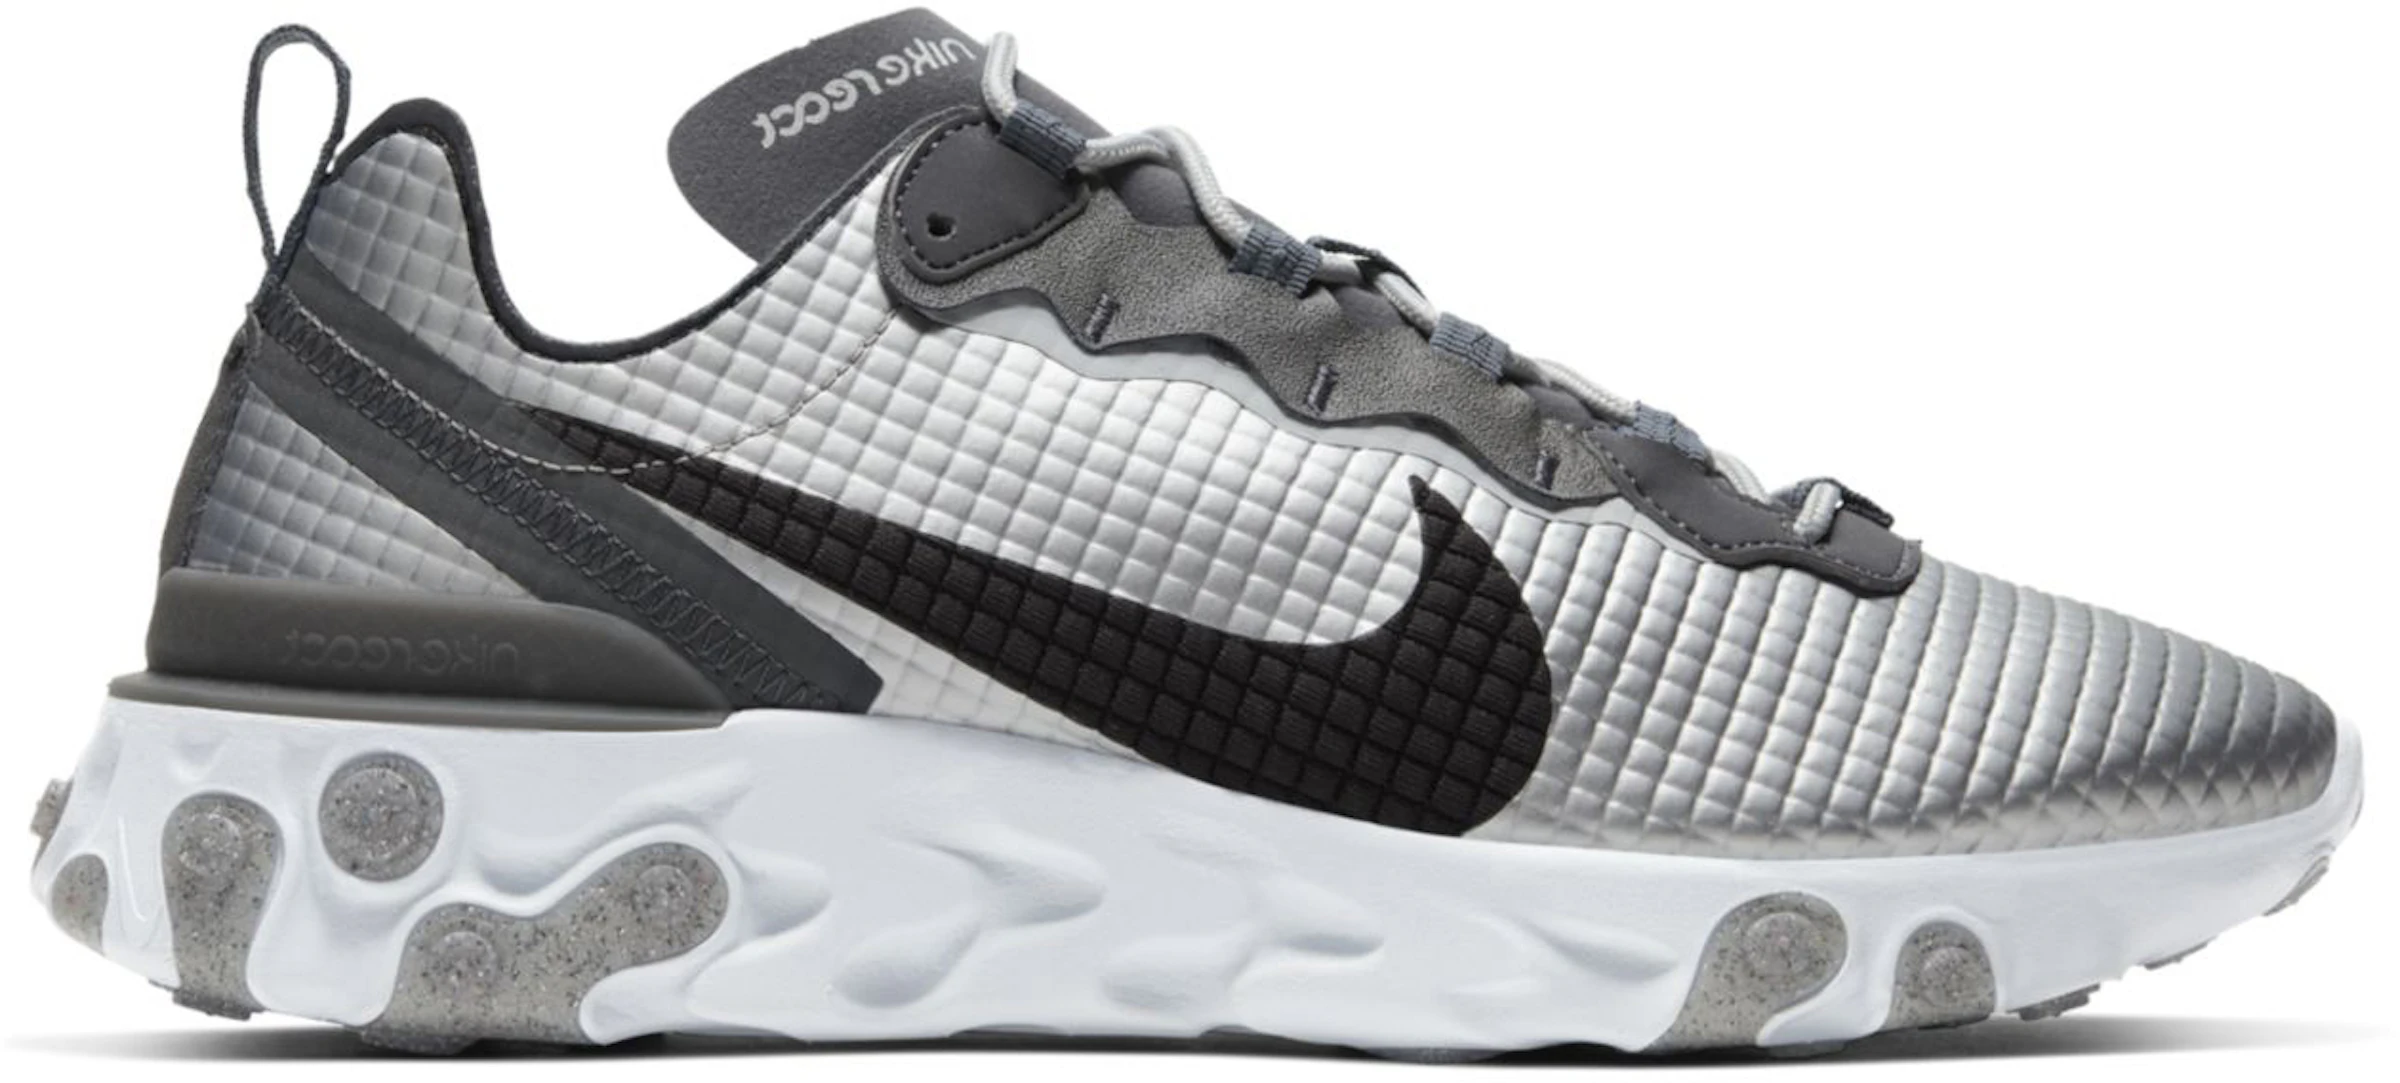 React Element Quilted Grid White - CI3835-001 - ES